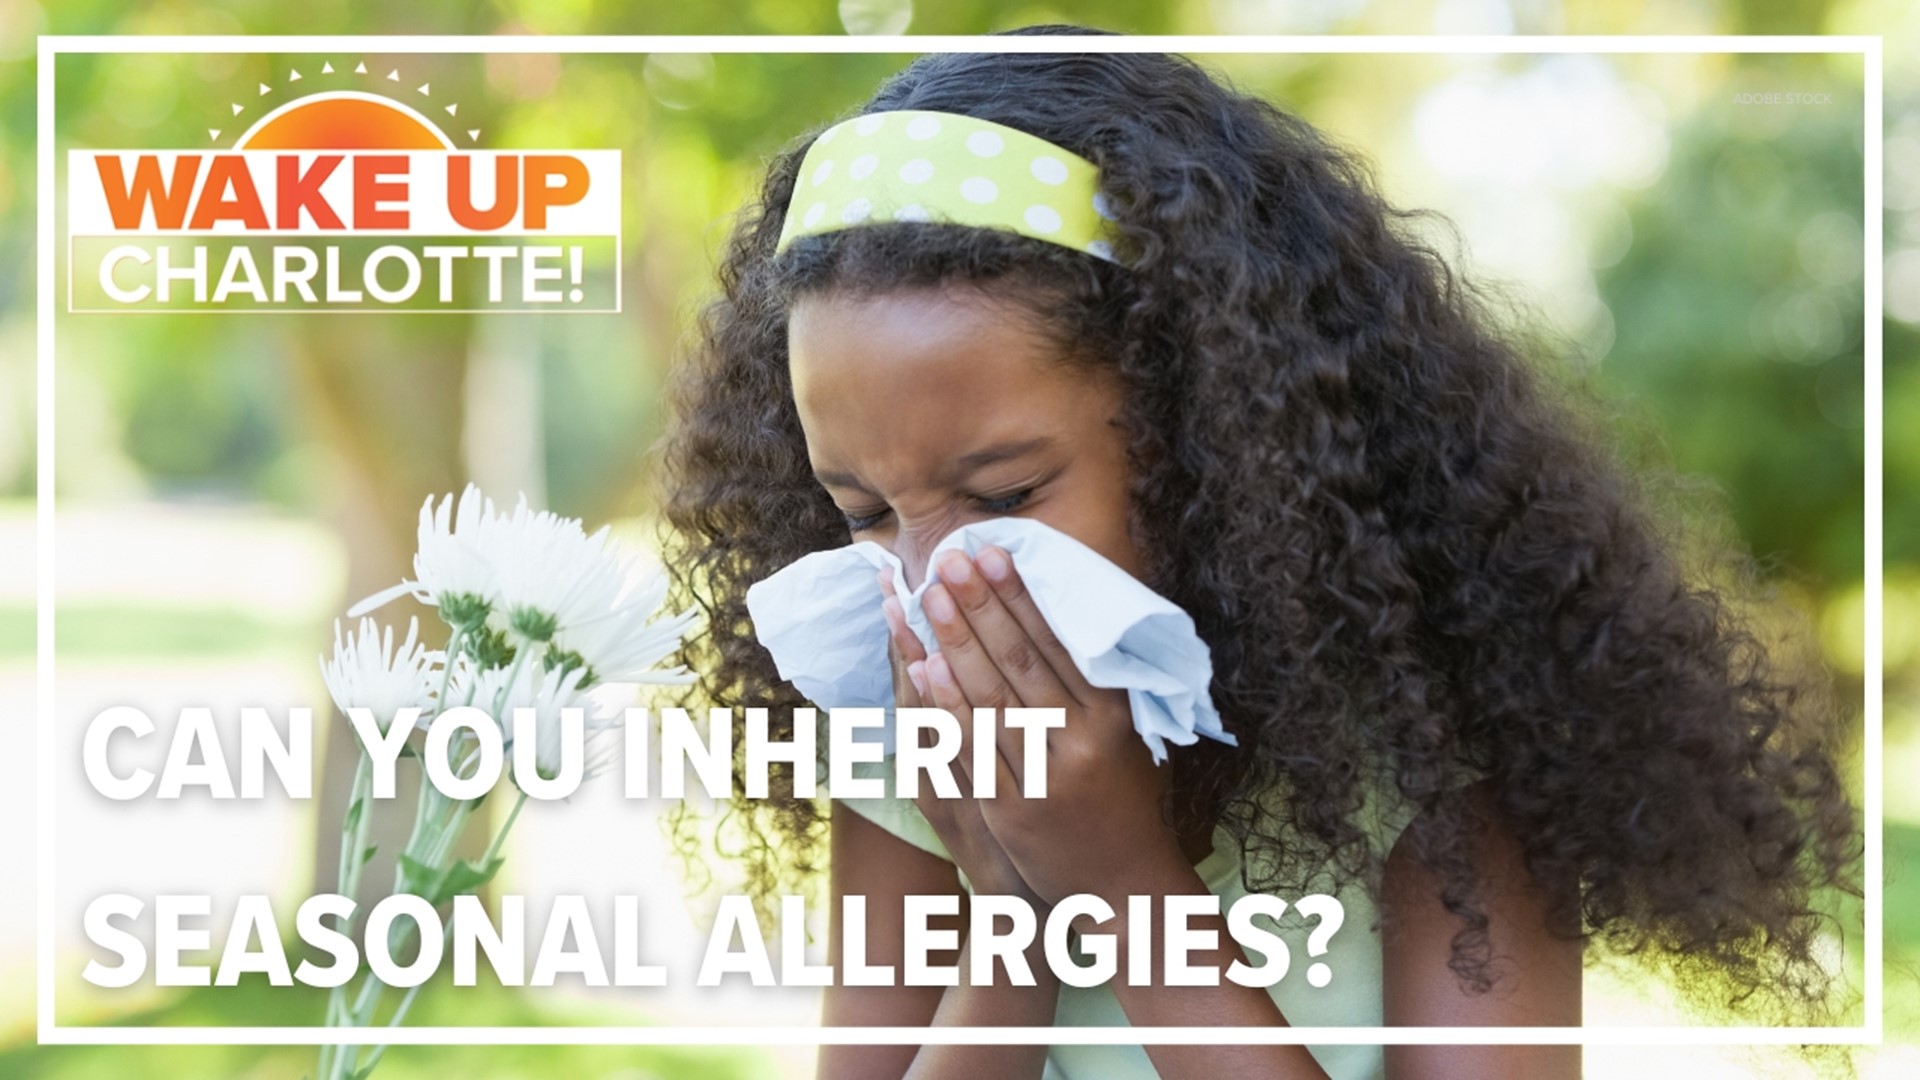 We can pin responsibility on our parents for a lot of things. But can we also blame them for our springtime sneezing, wheezing and coughing caused by allergies?